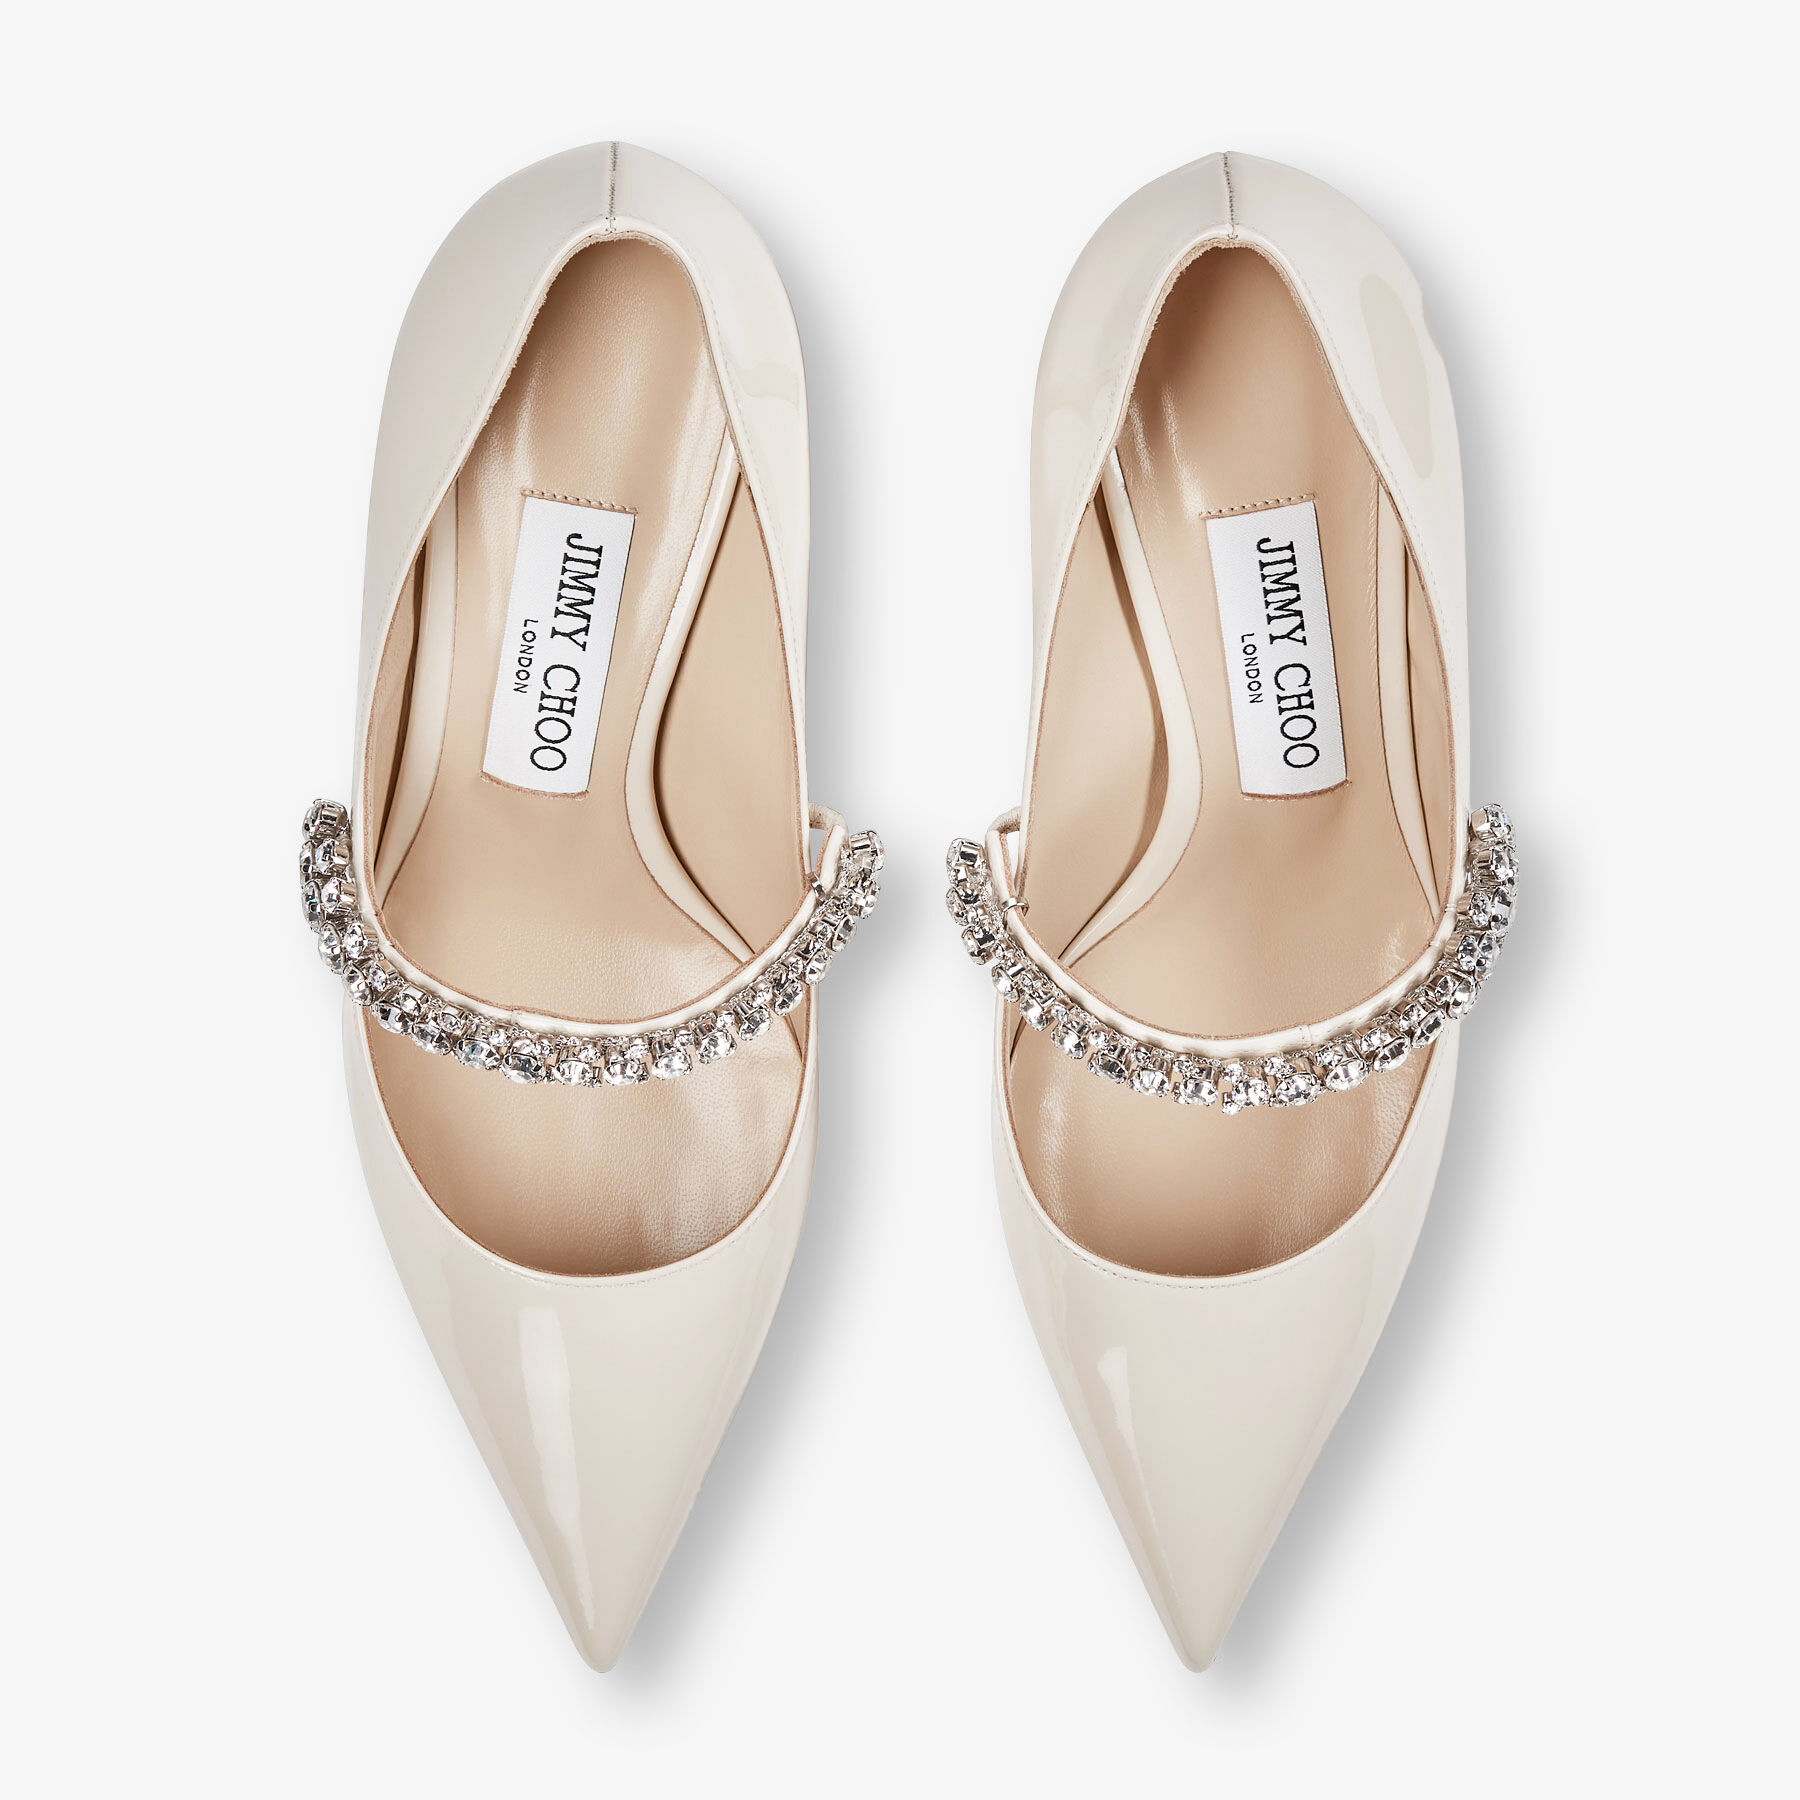 Bing Pump 65 | Linen Patent Leather Pumps with Crystals | JIMMY CHOO